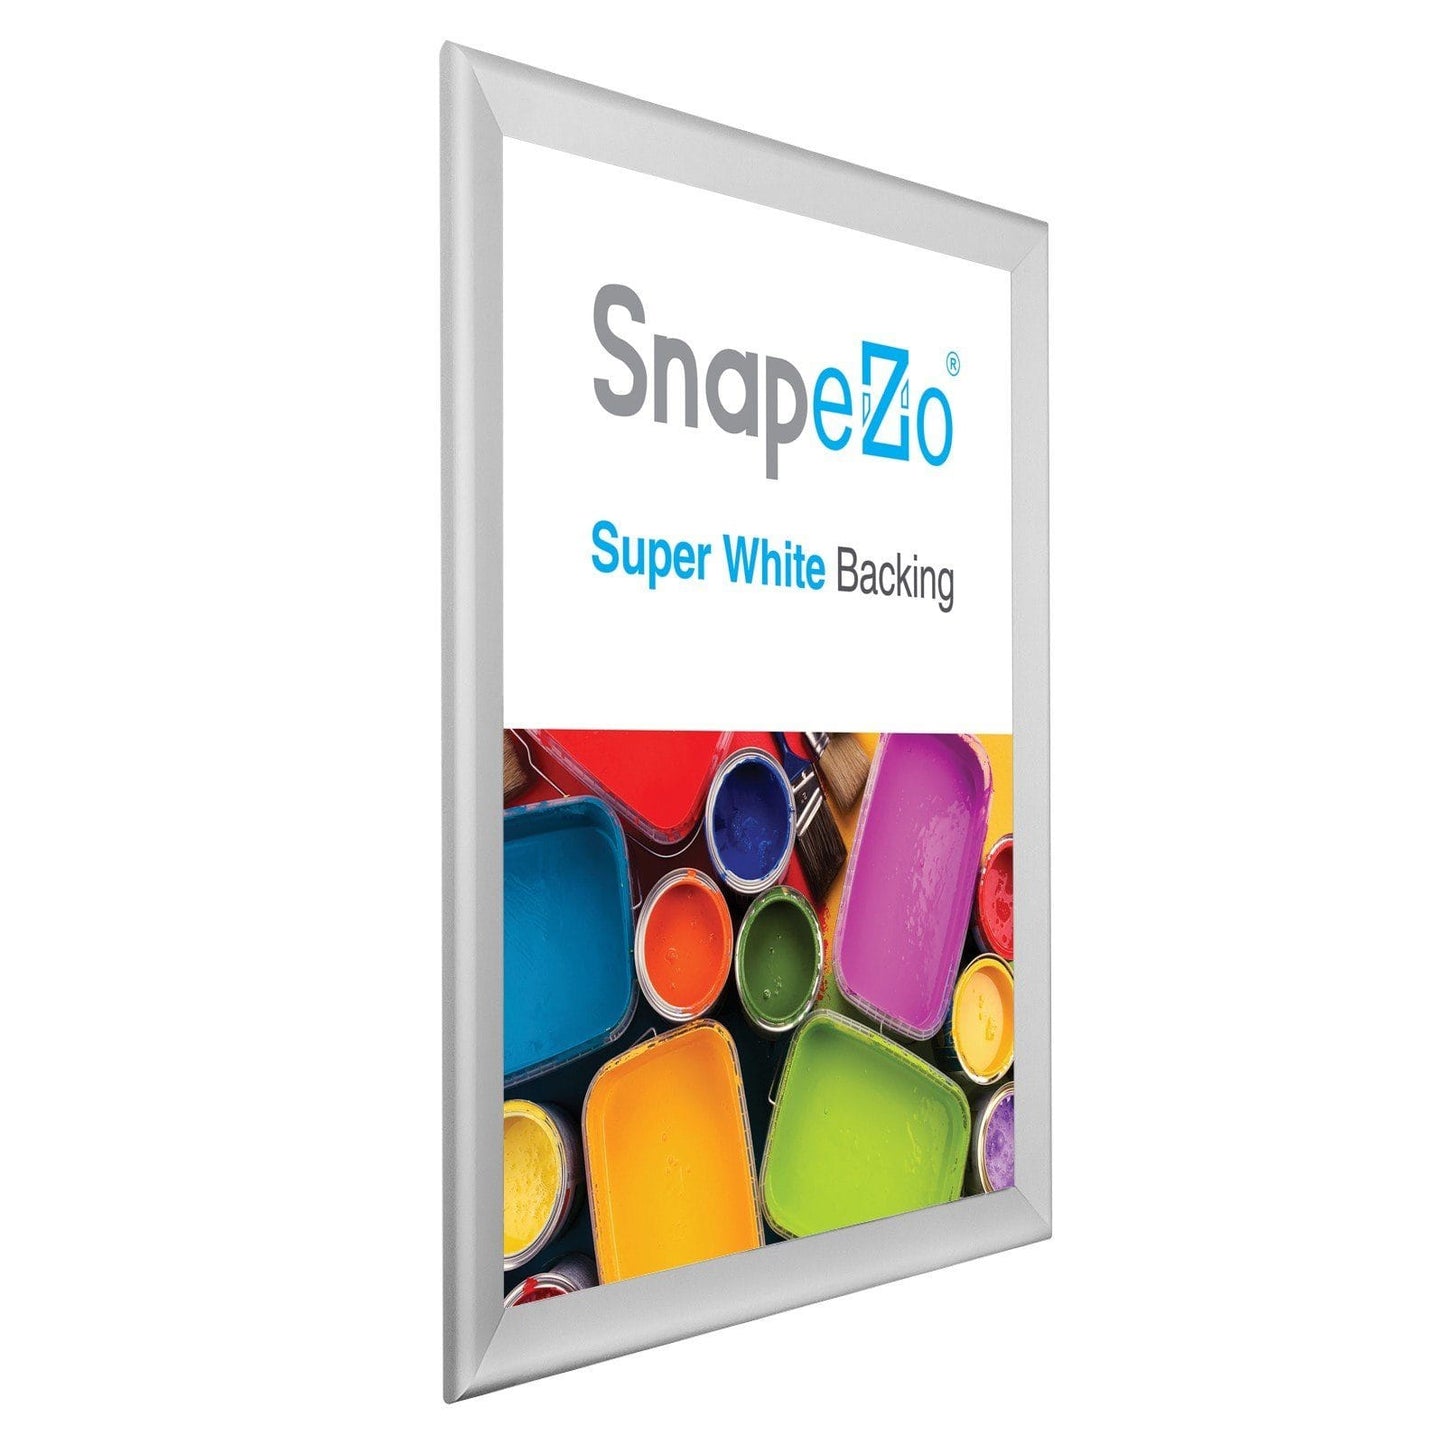 36x48 Silver SnapeZo® Poster Snap Frame 1.7" - Snap Frames Direct